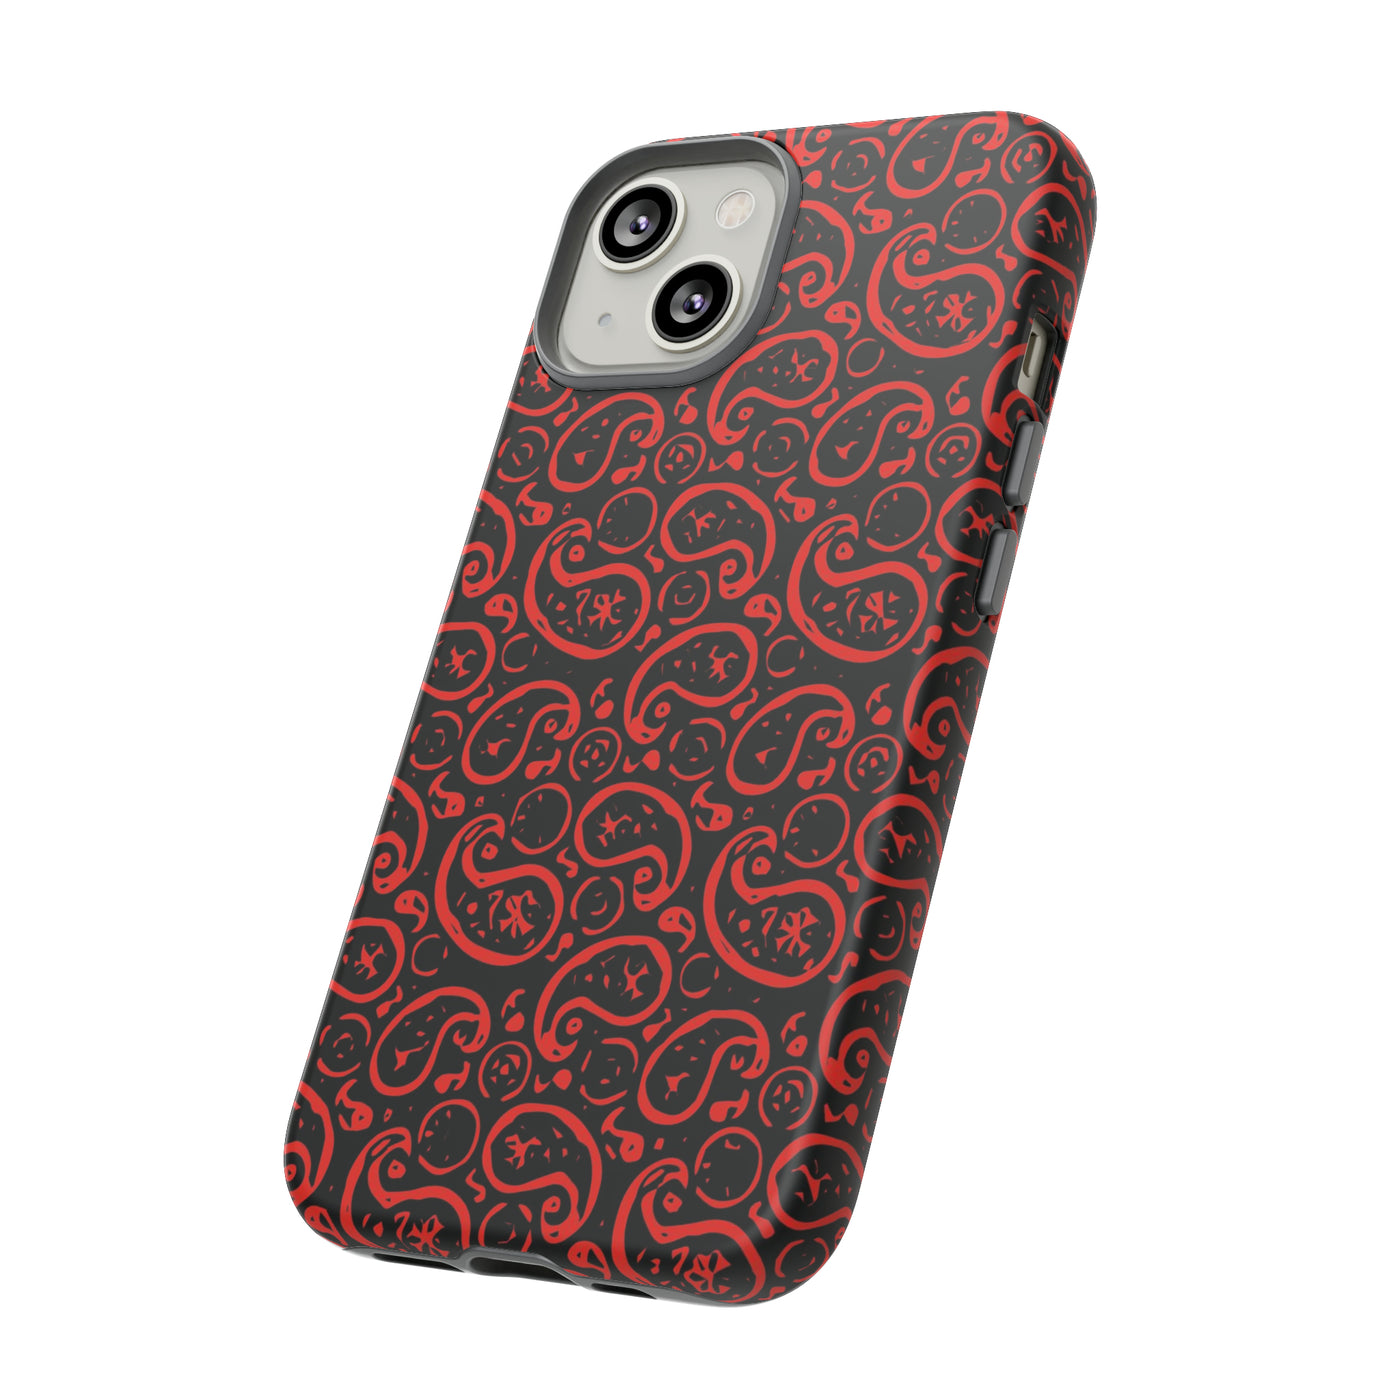 Cute IPhone Case | iPhone 15 Case | iPhone 15 Pro Max Case, Iphone 14 Case, Iphone 14 Pro Max Case IPhone Case for Art Lovers, Paisley Red